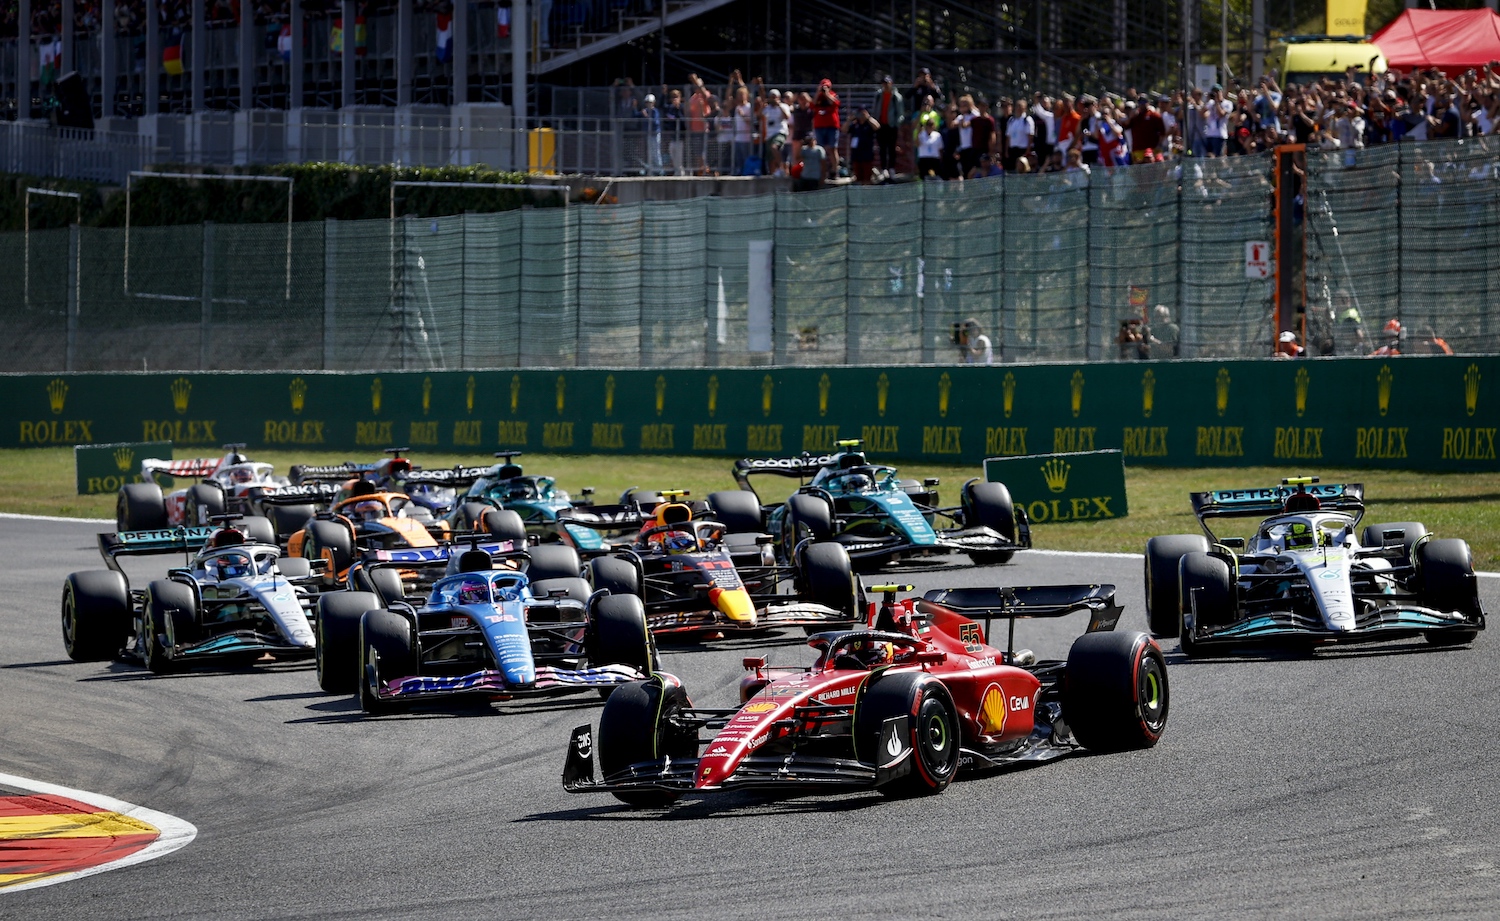 A pack of 2022 Formula 1 race cars rounding a corner during the Belgium Grand Prix, the audience visible in the background.